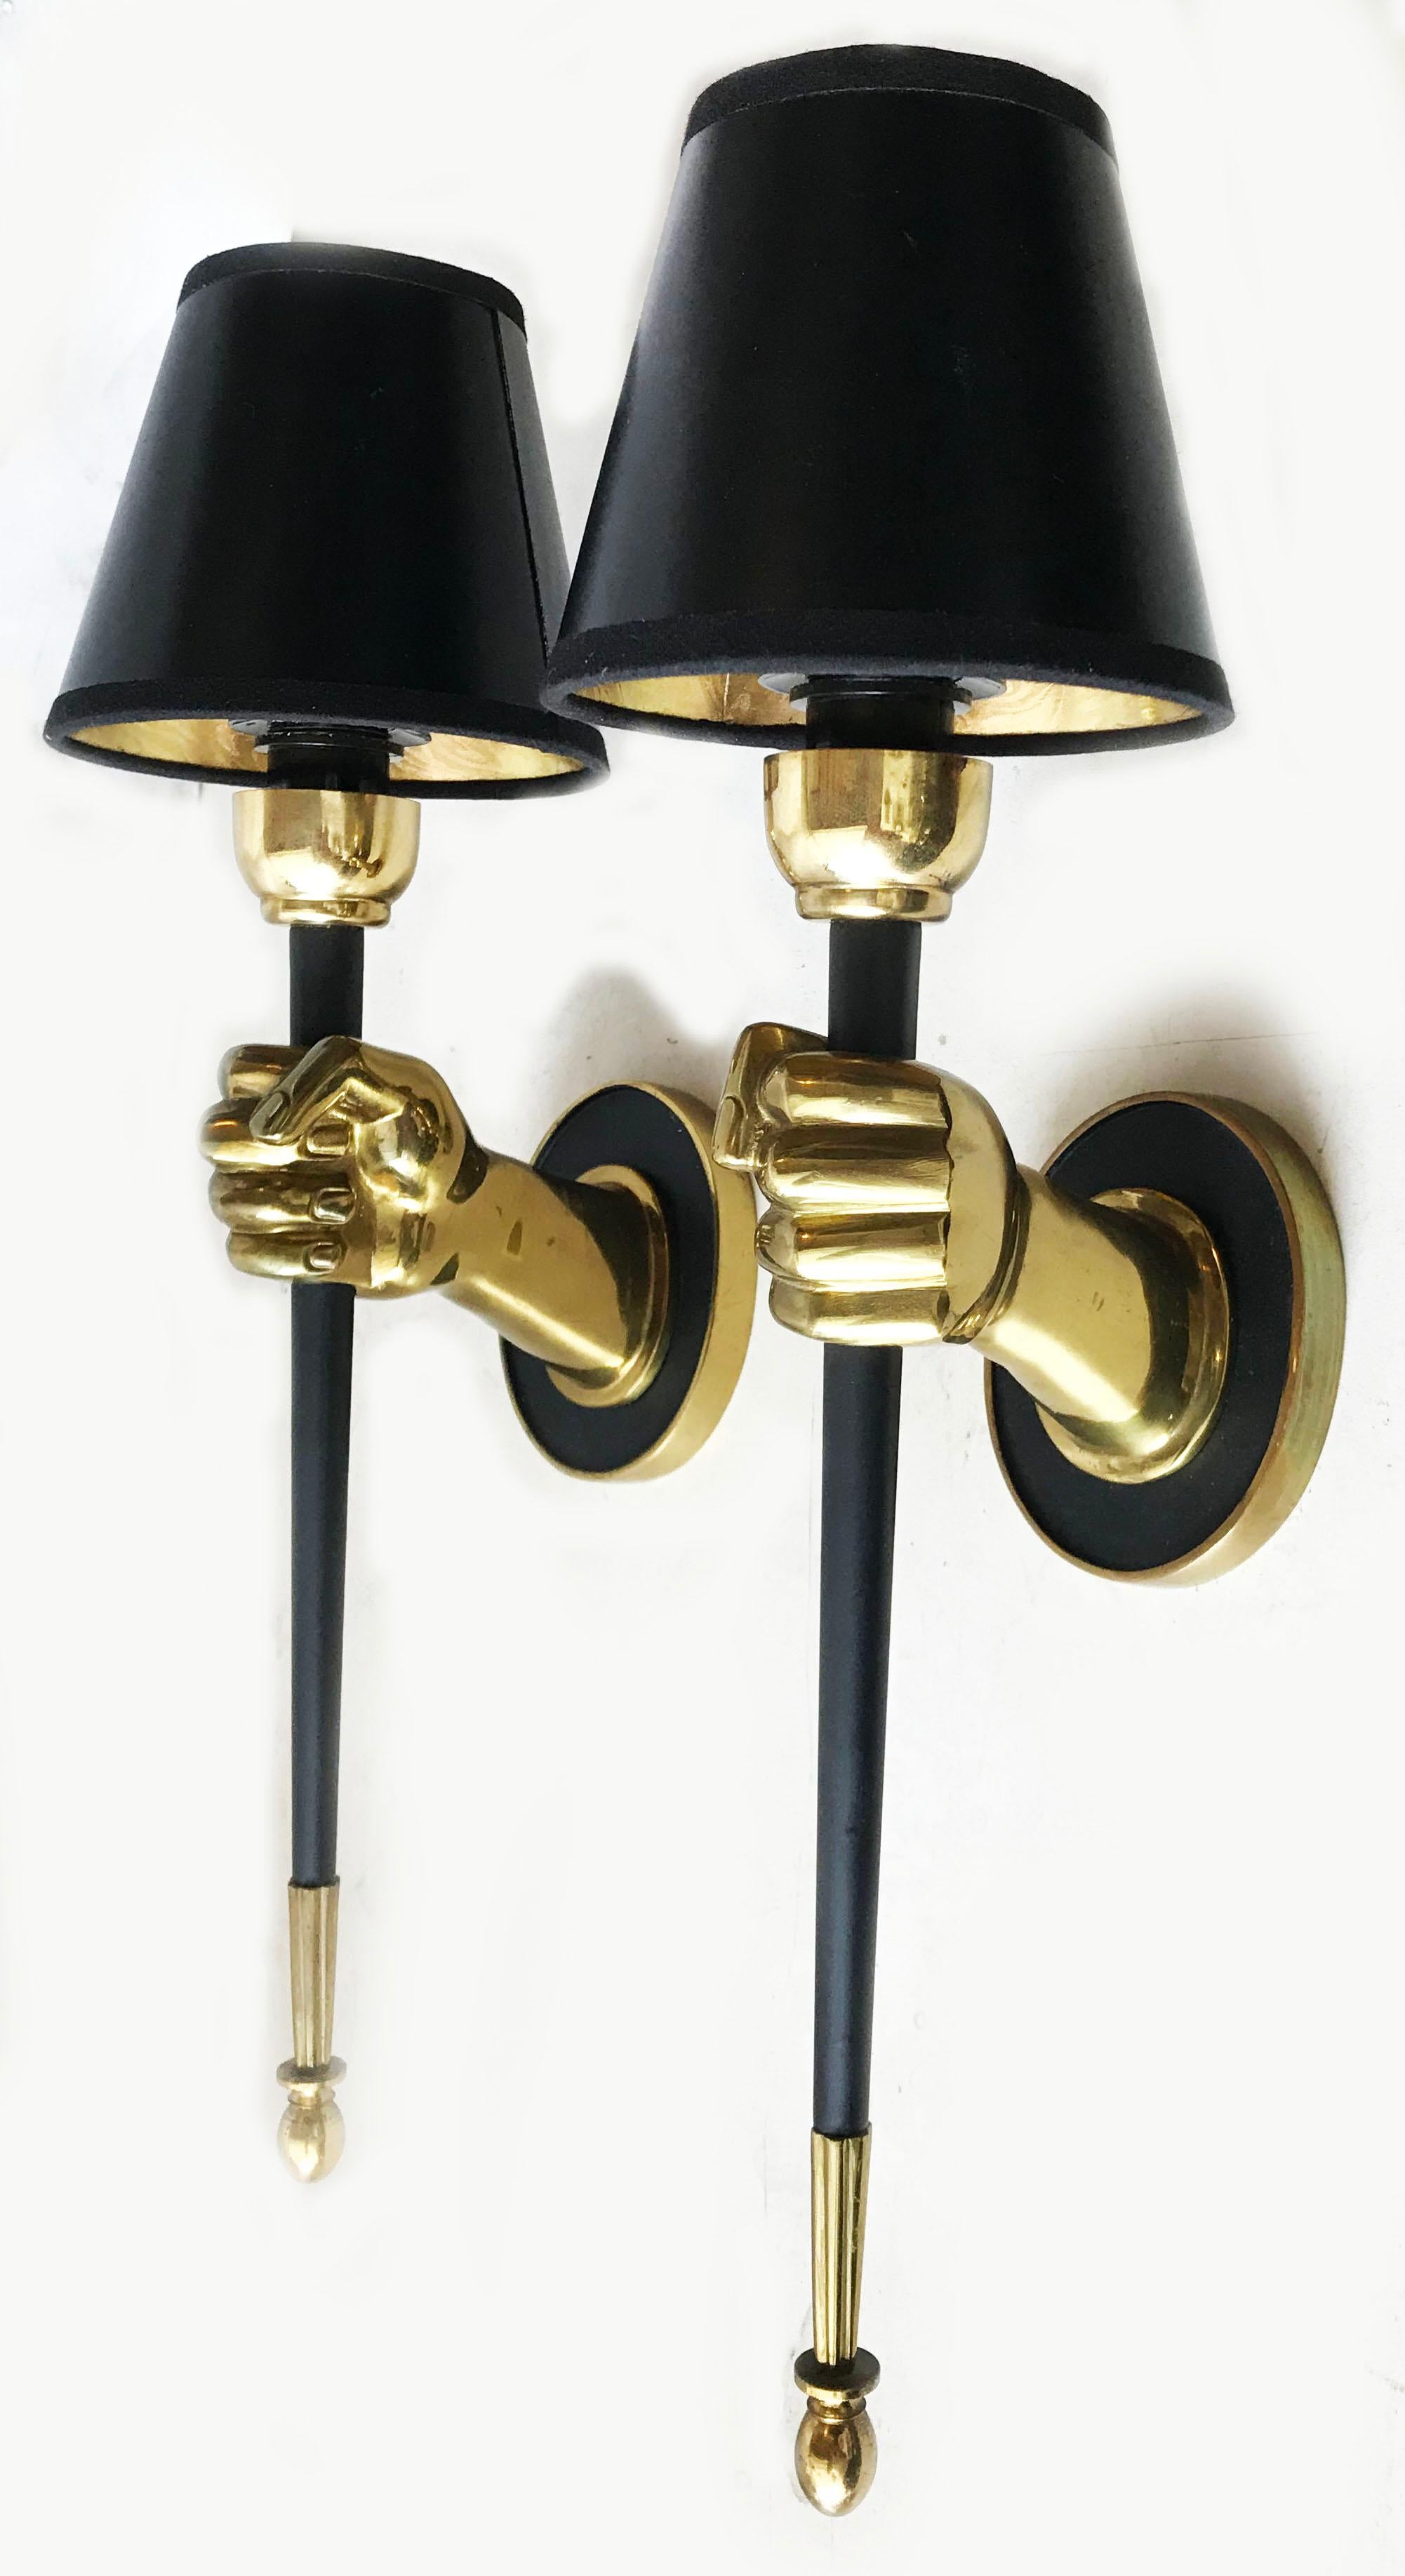 Superb pair of bronze sconces by Maison Jansen, 2 patinas bronze and black.
1 bulb, 60 watts max
US rewired and in working condition
Measures: Back plate 4.5